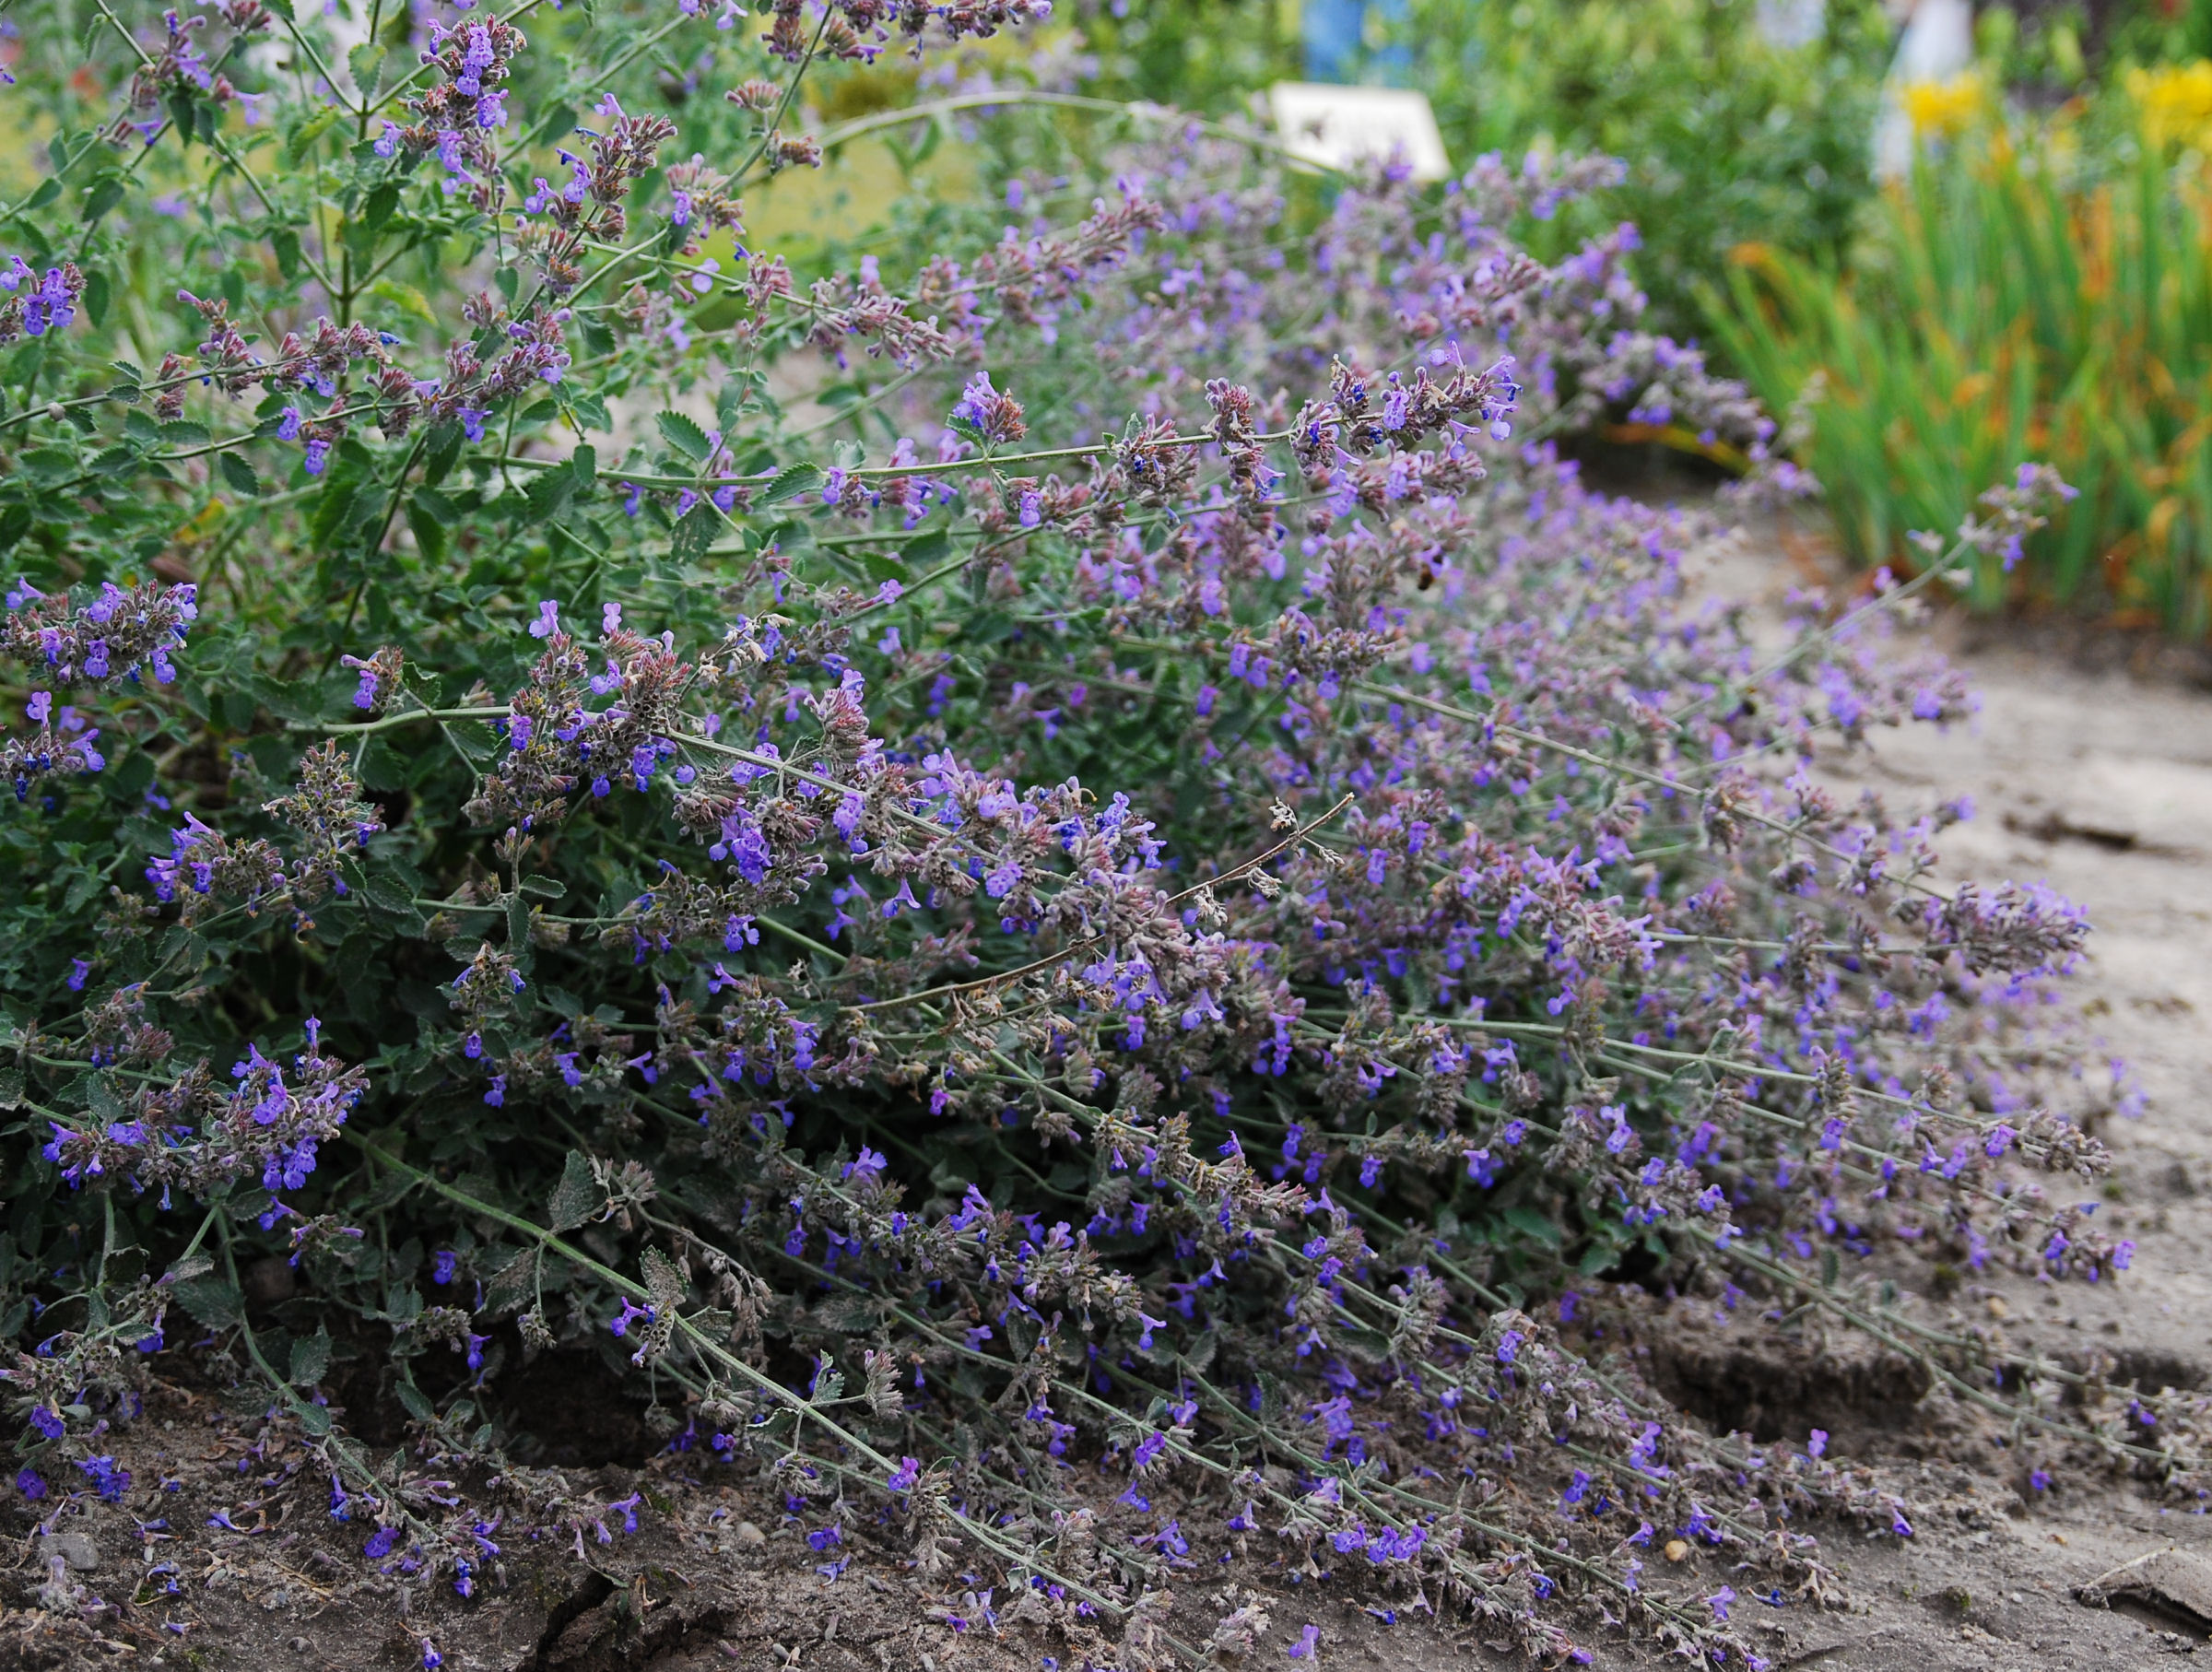 purple-blue flowers with green leaves and gray-green stems